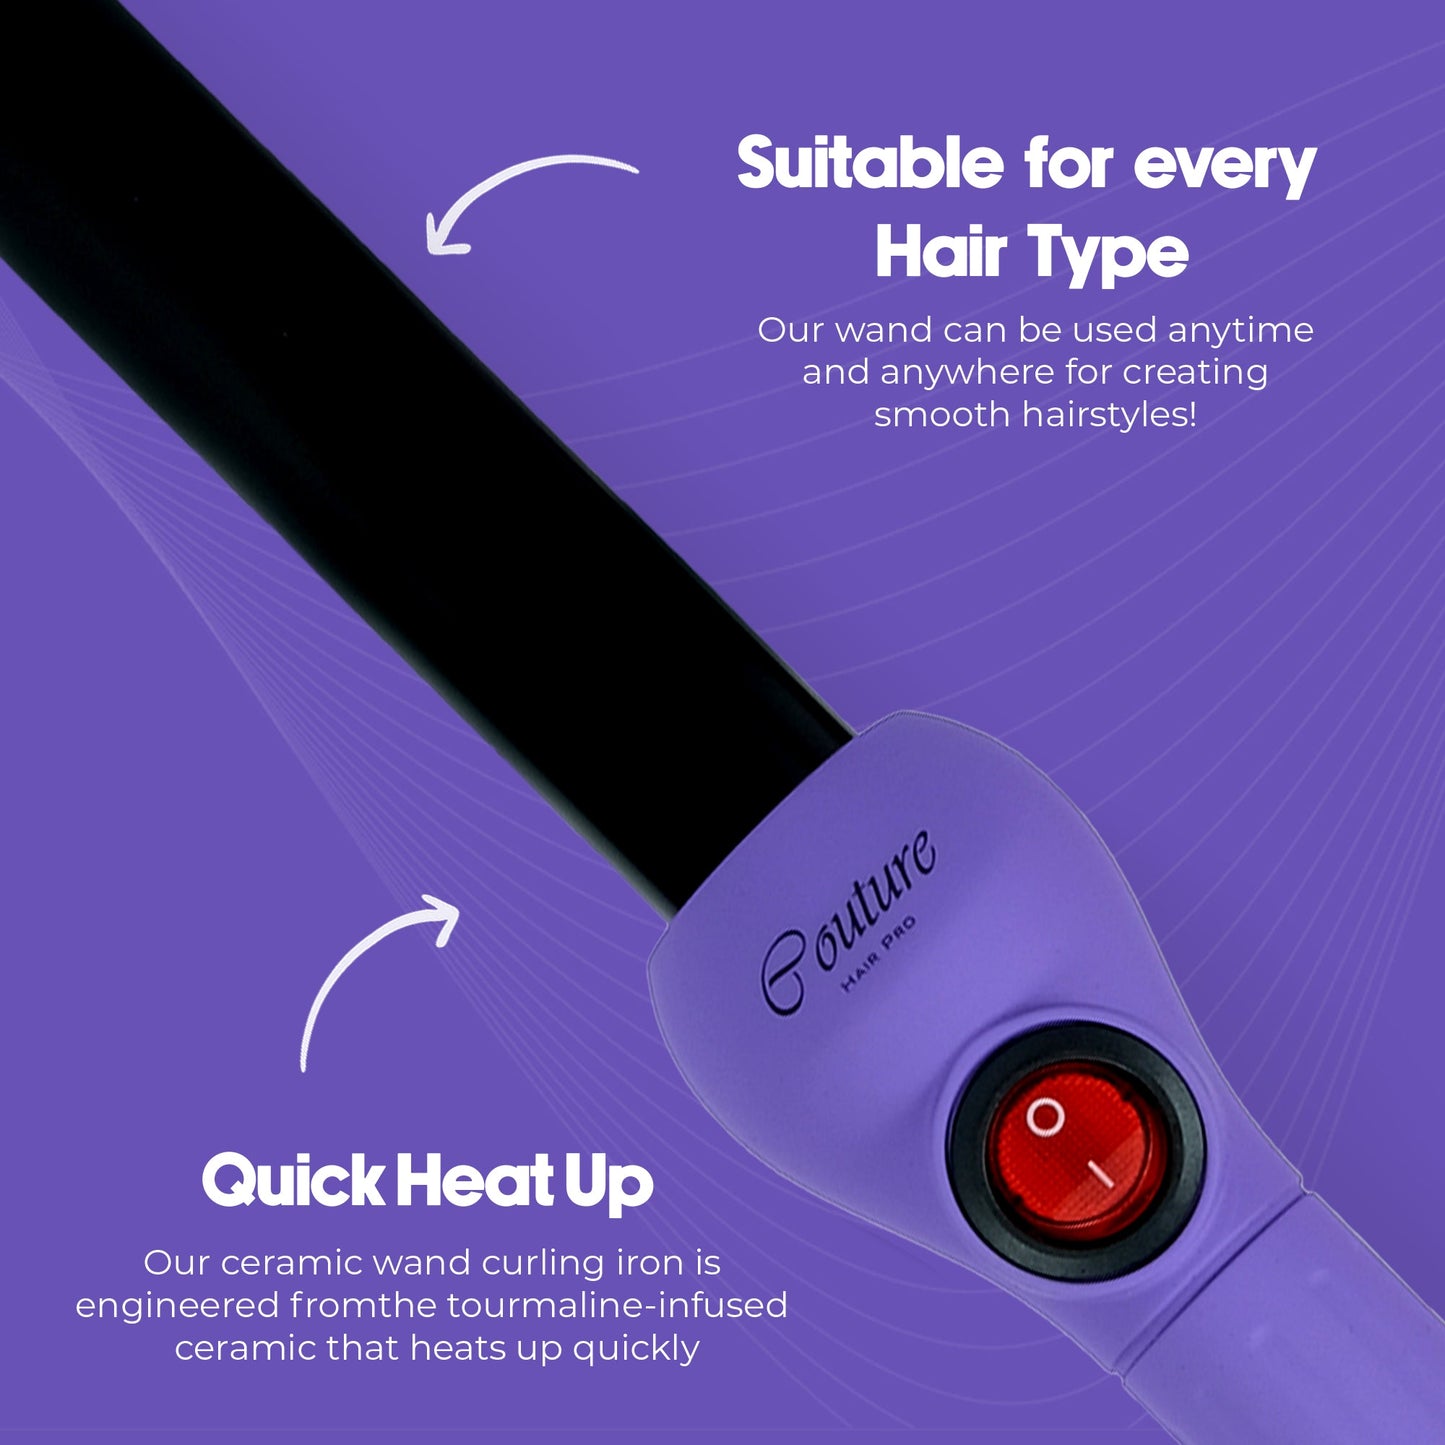 Couture Hair Pro Hair Curler Beverly Hills Limited Edition - Purple - Couture Hair Pro